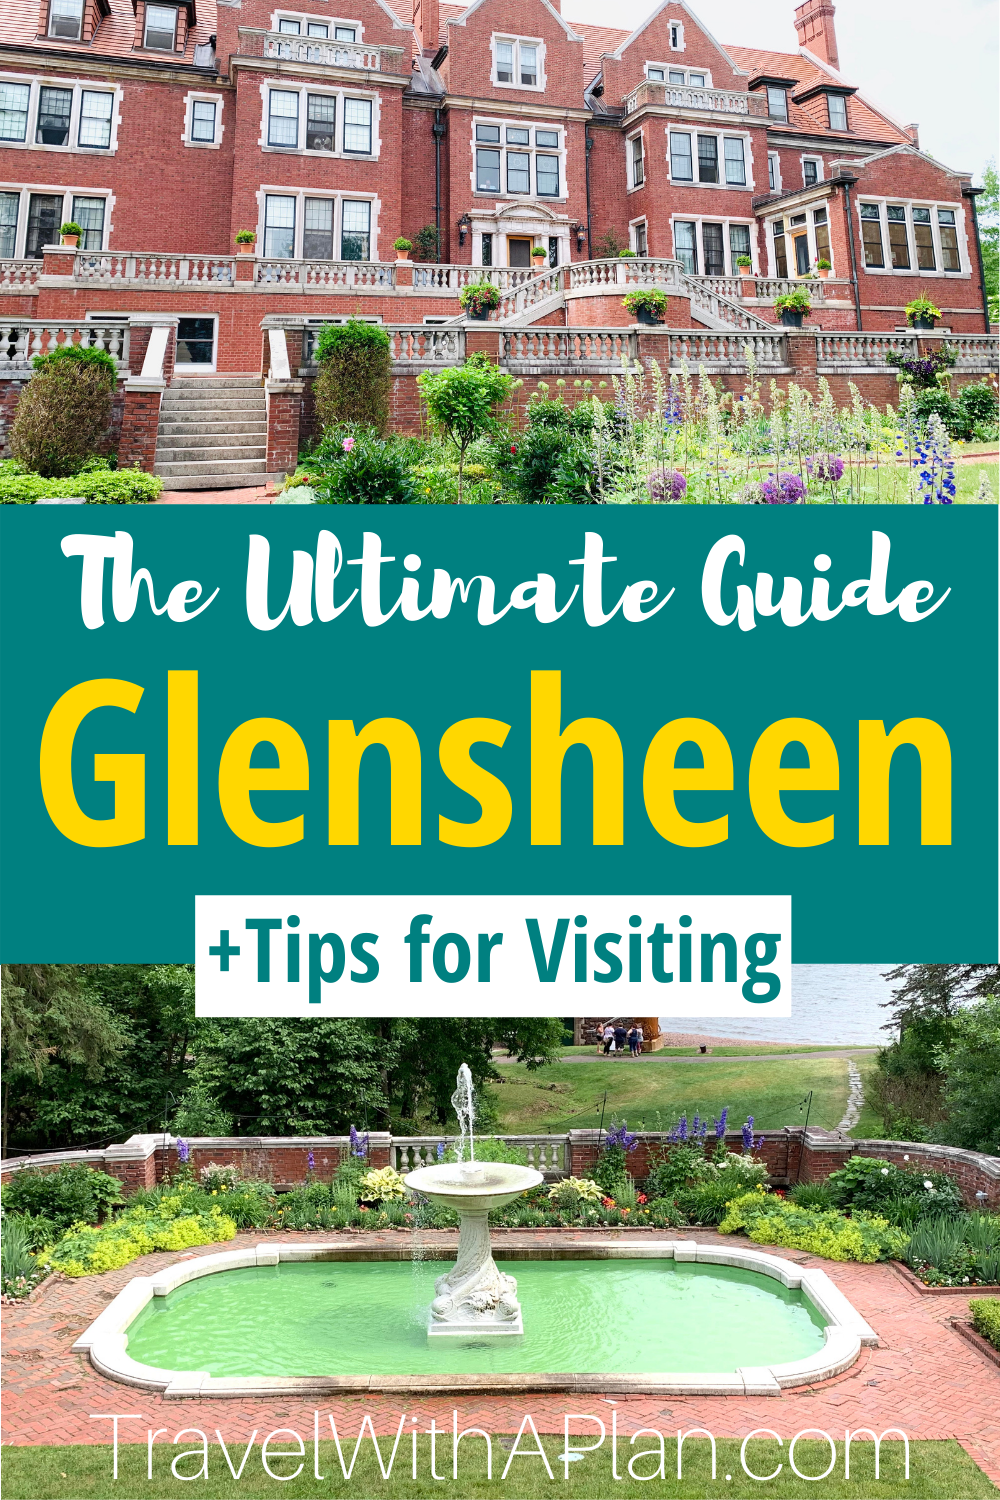 Click here for the ultimate guide and best tips for Glensheen Mansion Tours in Duluth, MN from Top US Family Travel Blog, Travel With A Plan.